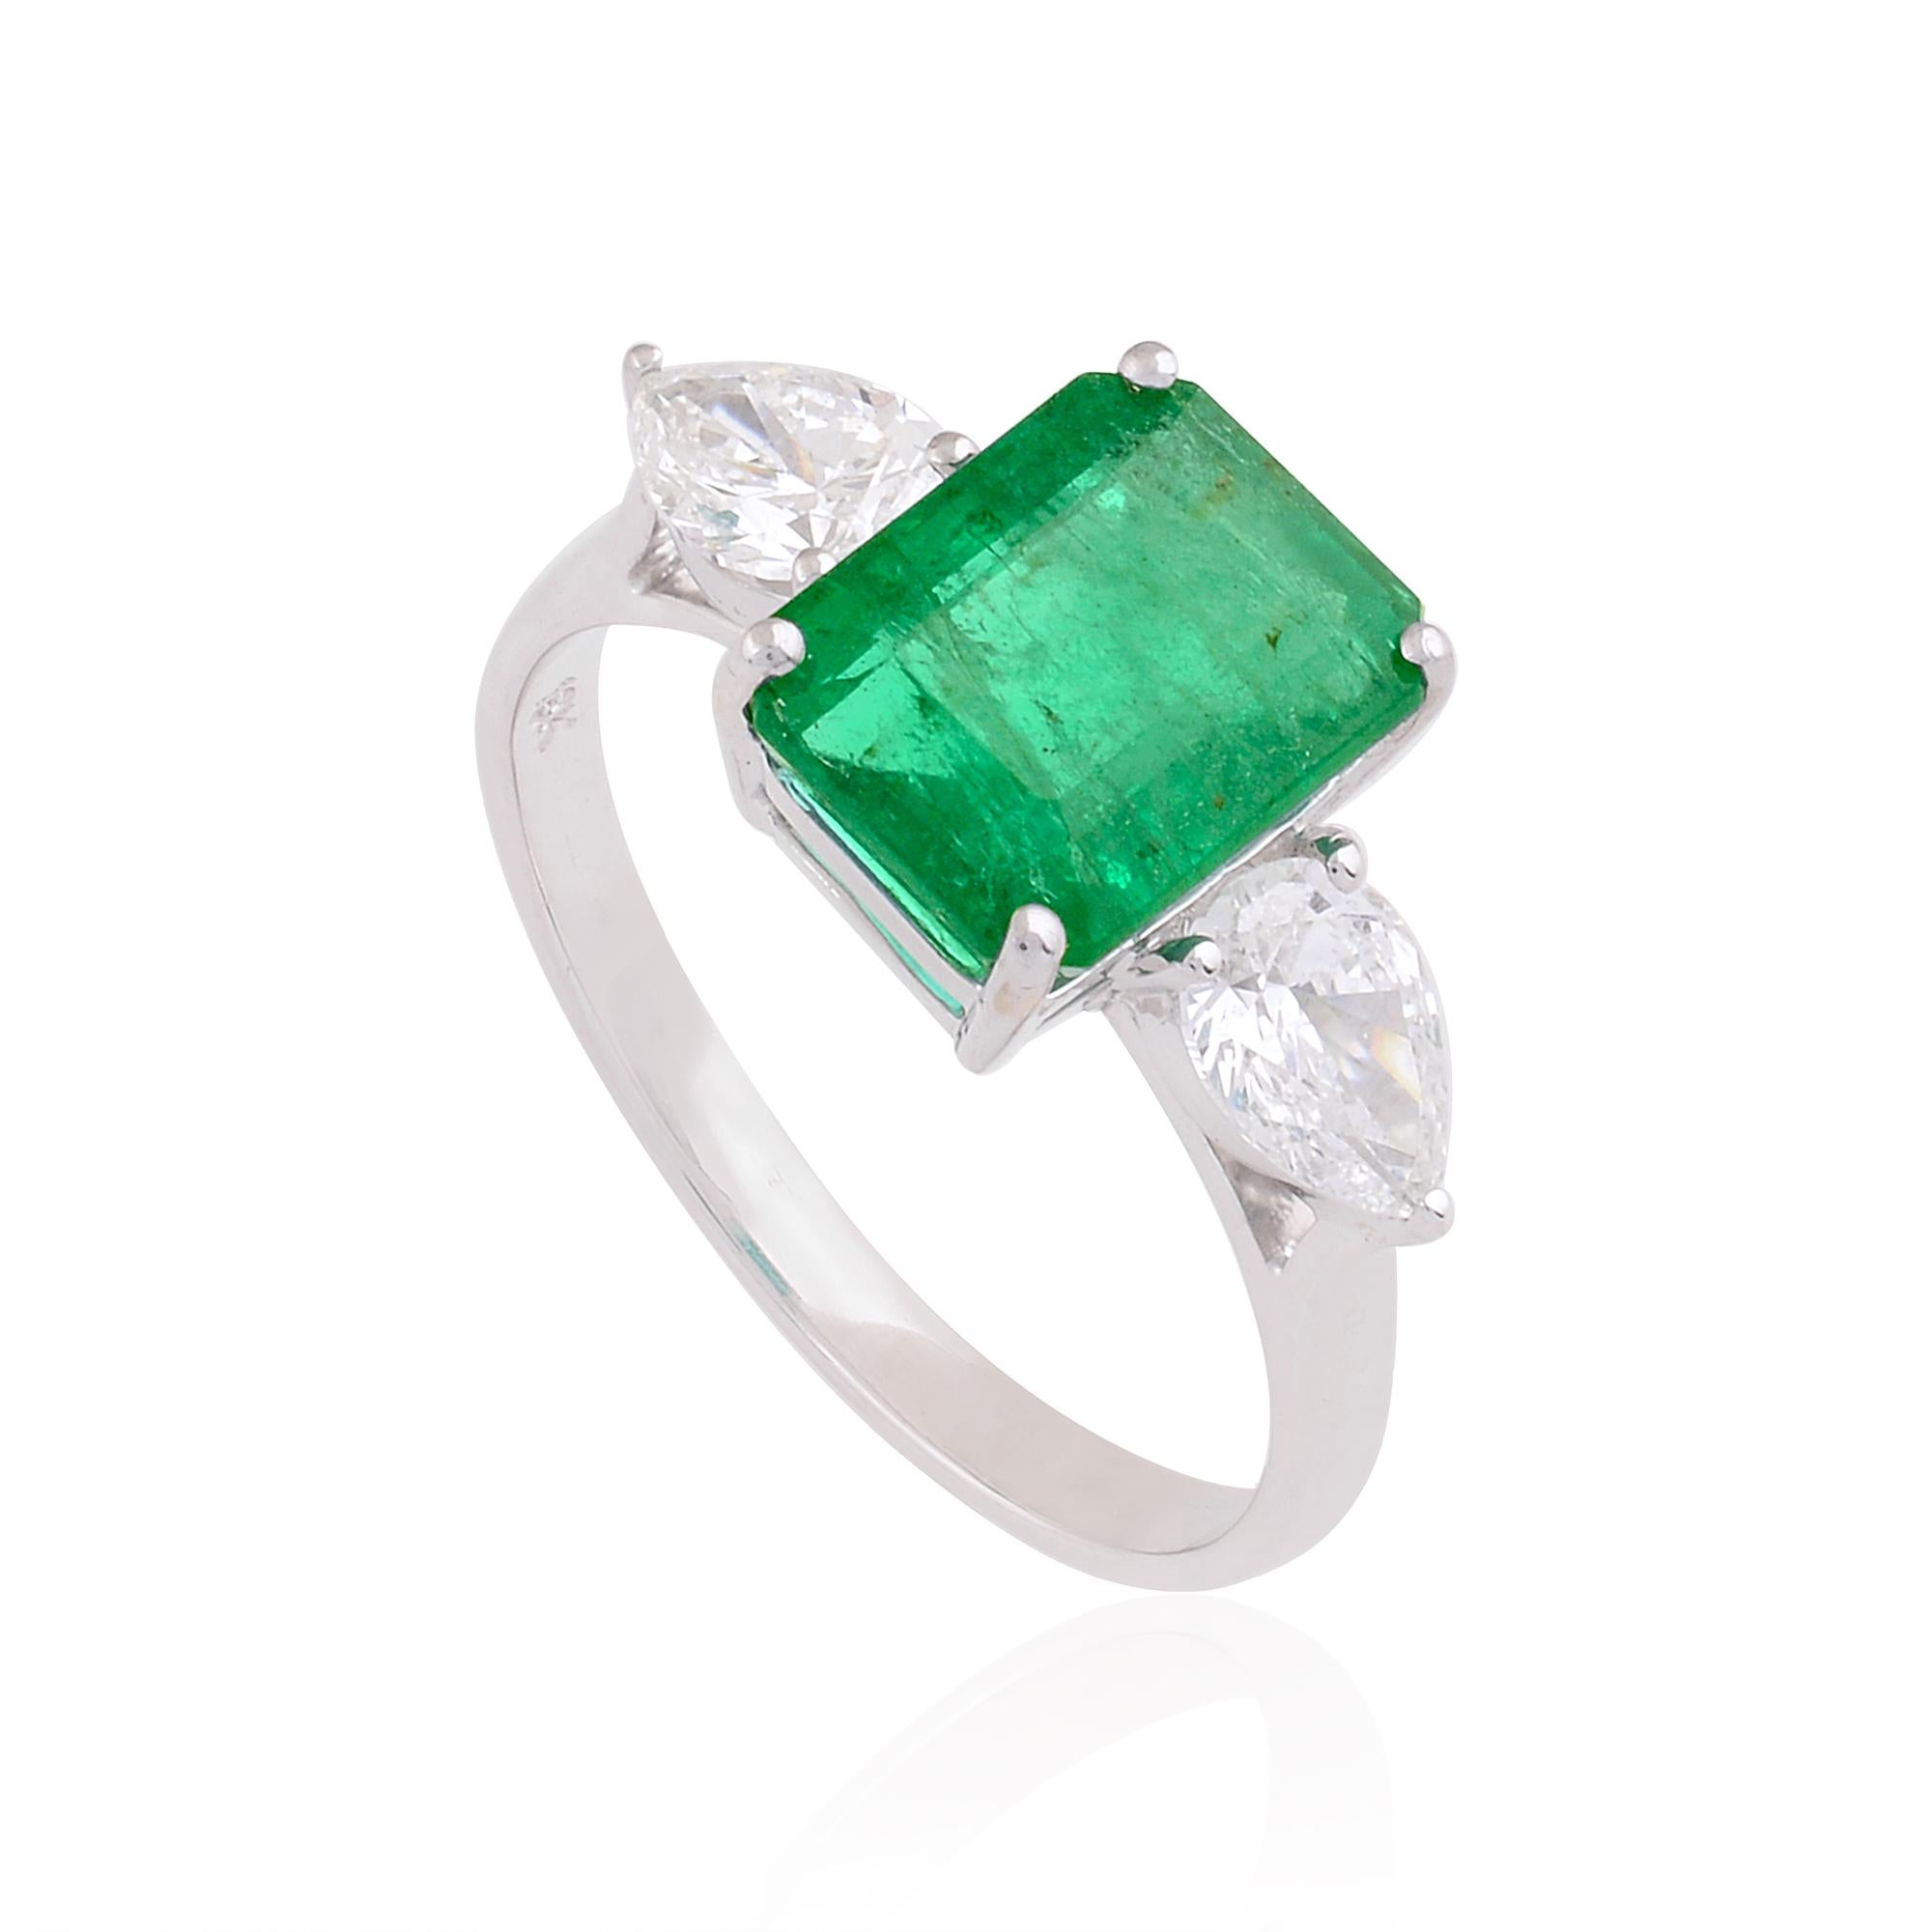 For Sale:  Natural Emerald Gemstone Cocktail Ring Pear Diamond 18 Karat White Gold Jewelry 4